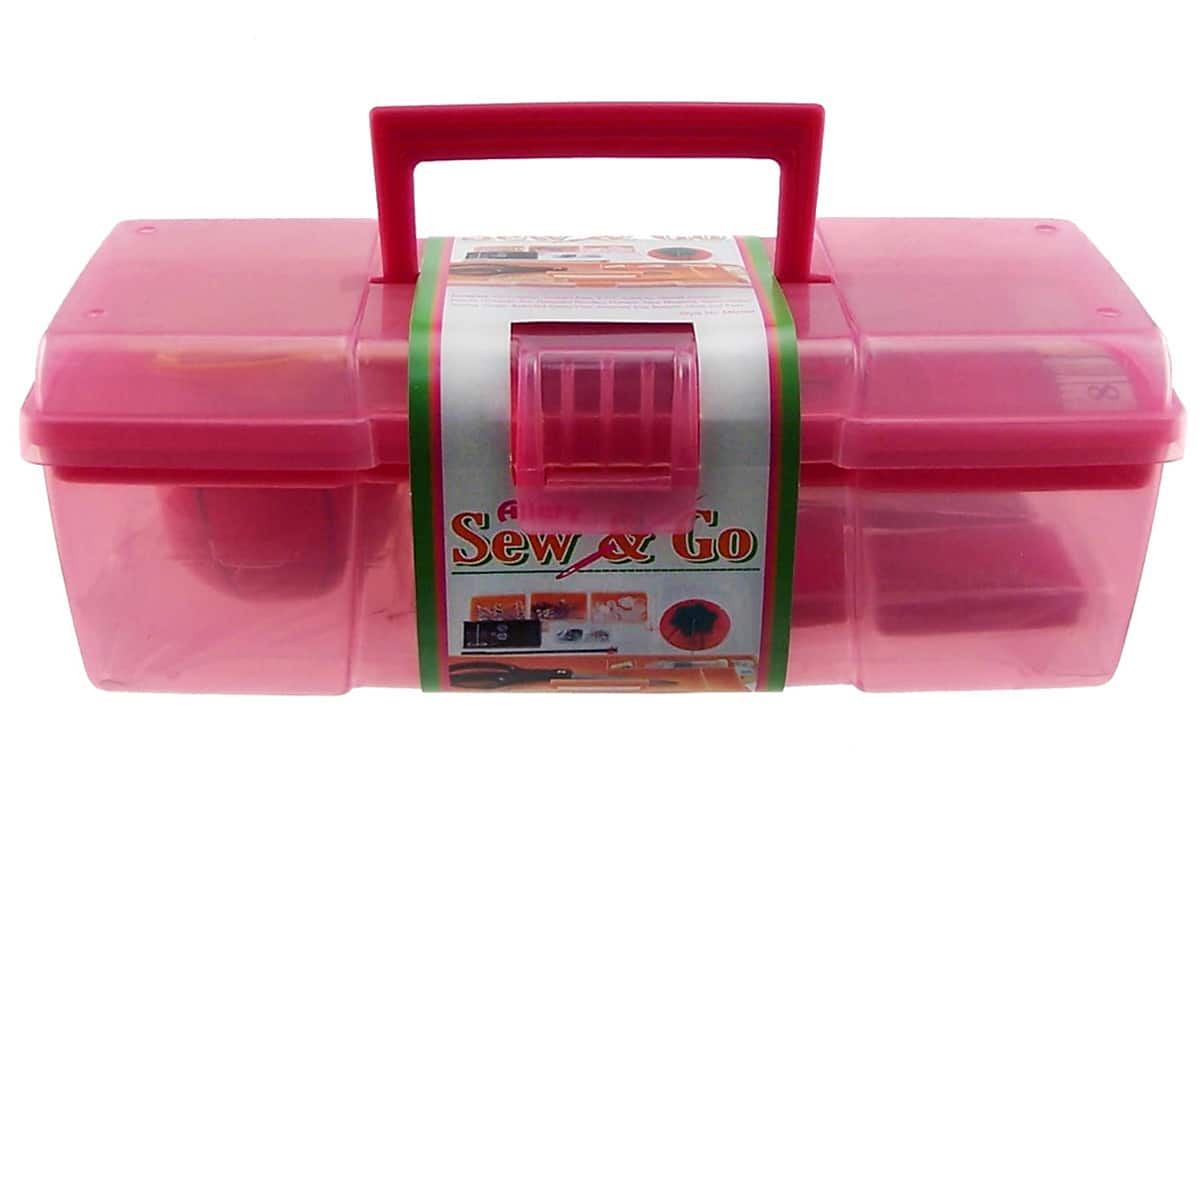 Allary Home & Travel Sewing Kit - 1 ct pkg